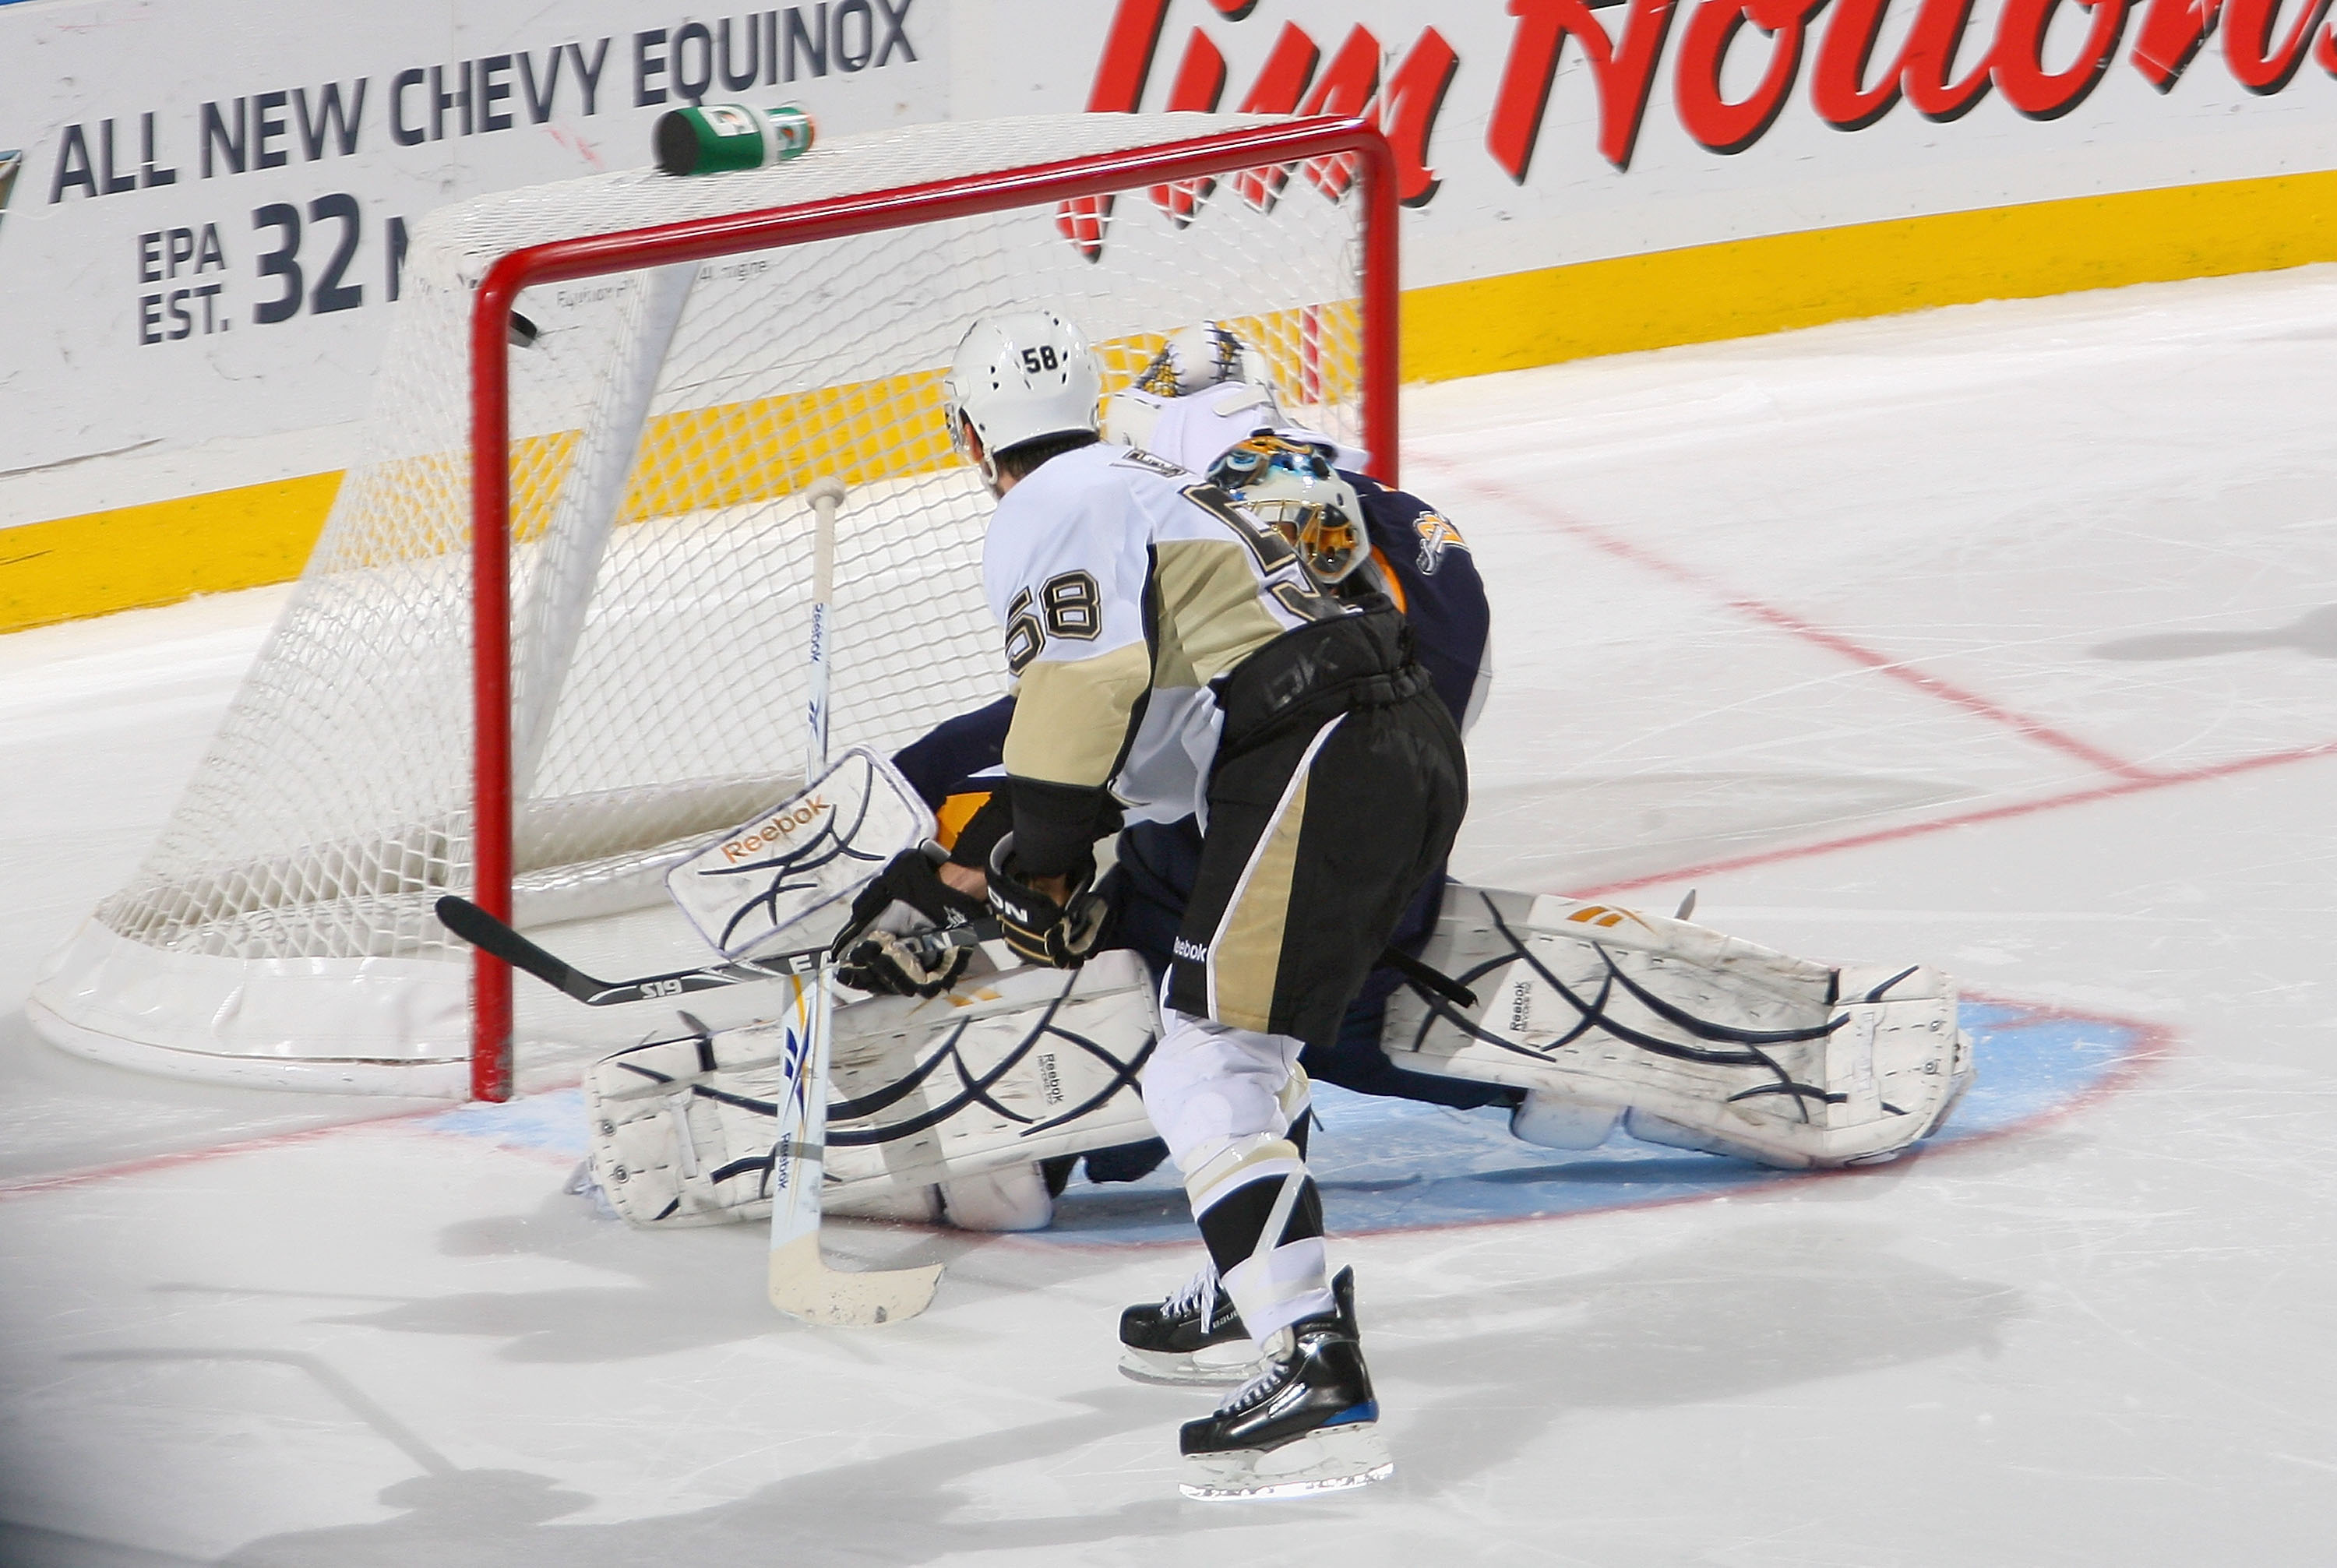 BUFFALO, NY - DECEMBER 19: Kris Letang #58 of the Pittsburgh Penguins scores the game winning goal in a shootout on Patrick Lalime #40 of the Buffalo Sabres  at HSBC Arena on December 19, 2009 in Buffalo, New York. Pittsburgh won 2-1. (Photo by Rick Stewa